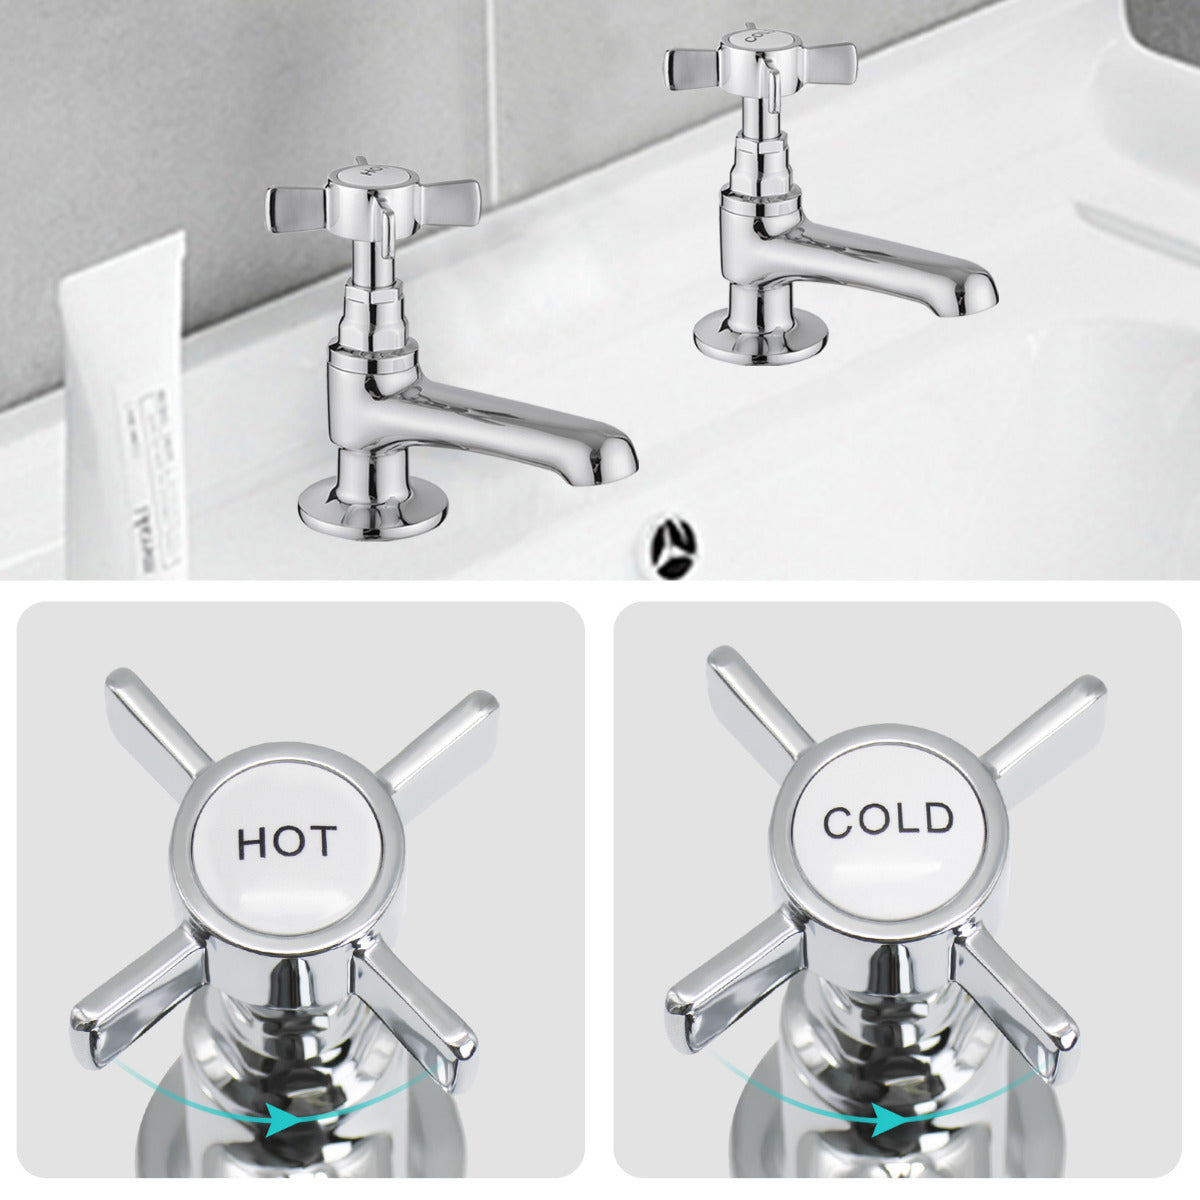 JassferryJASSFERRY New Pair of Basin Taps Hot and Cold Water Bathroom Sink Cross HandleBasin Taps